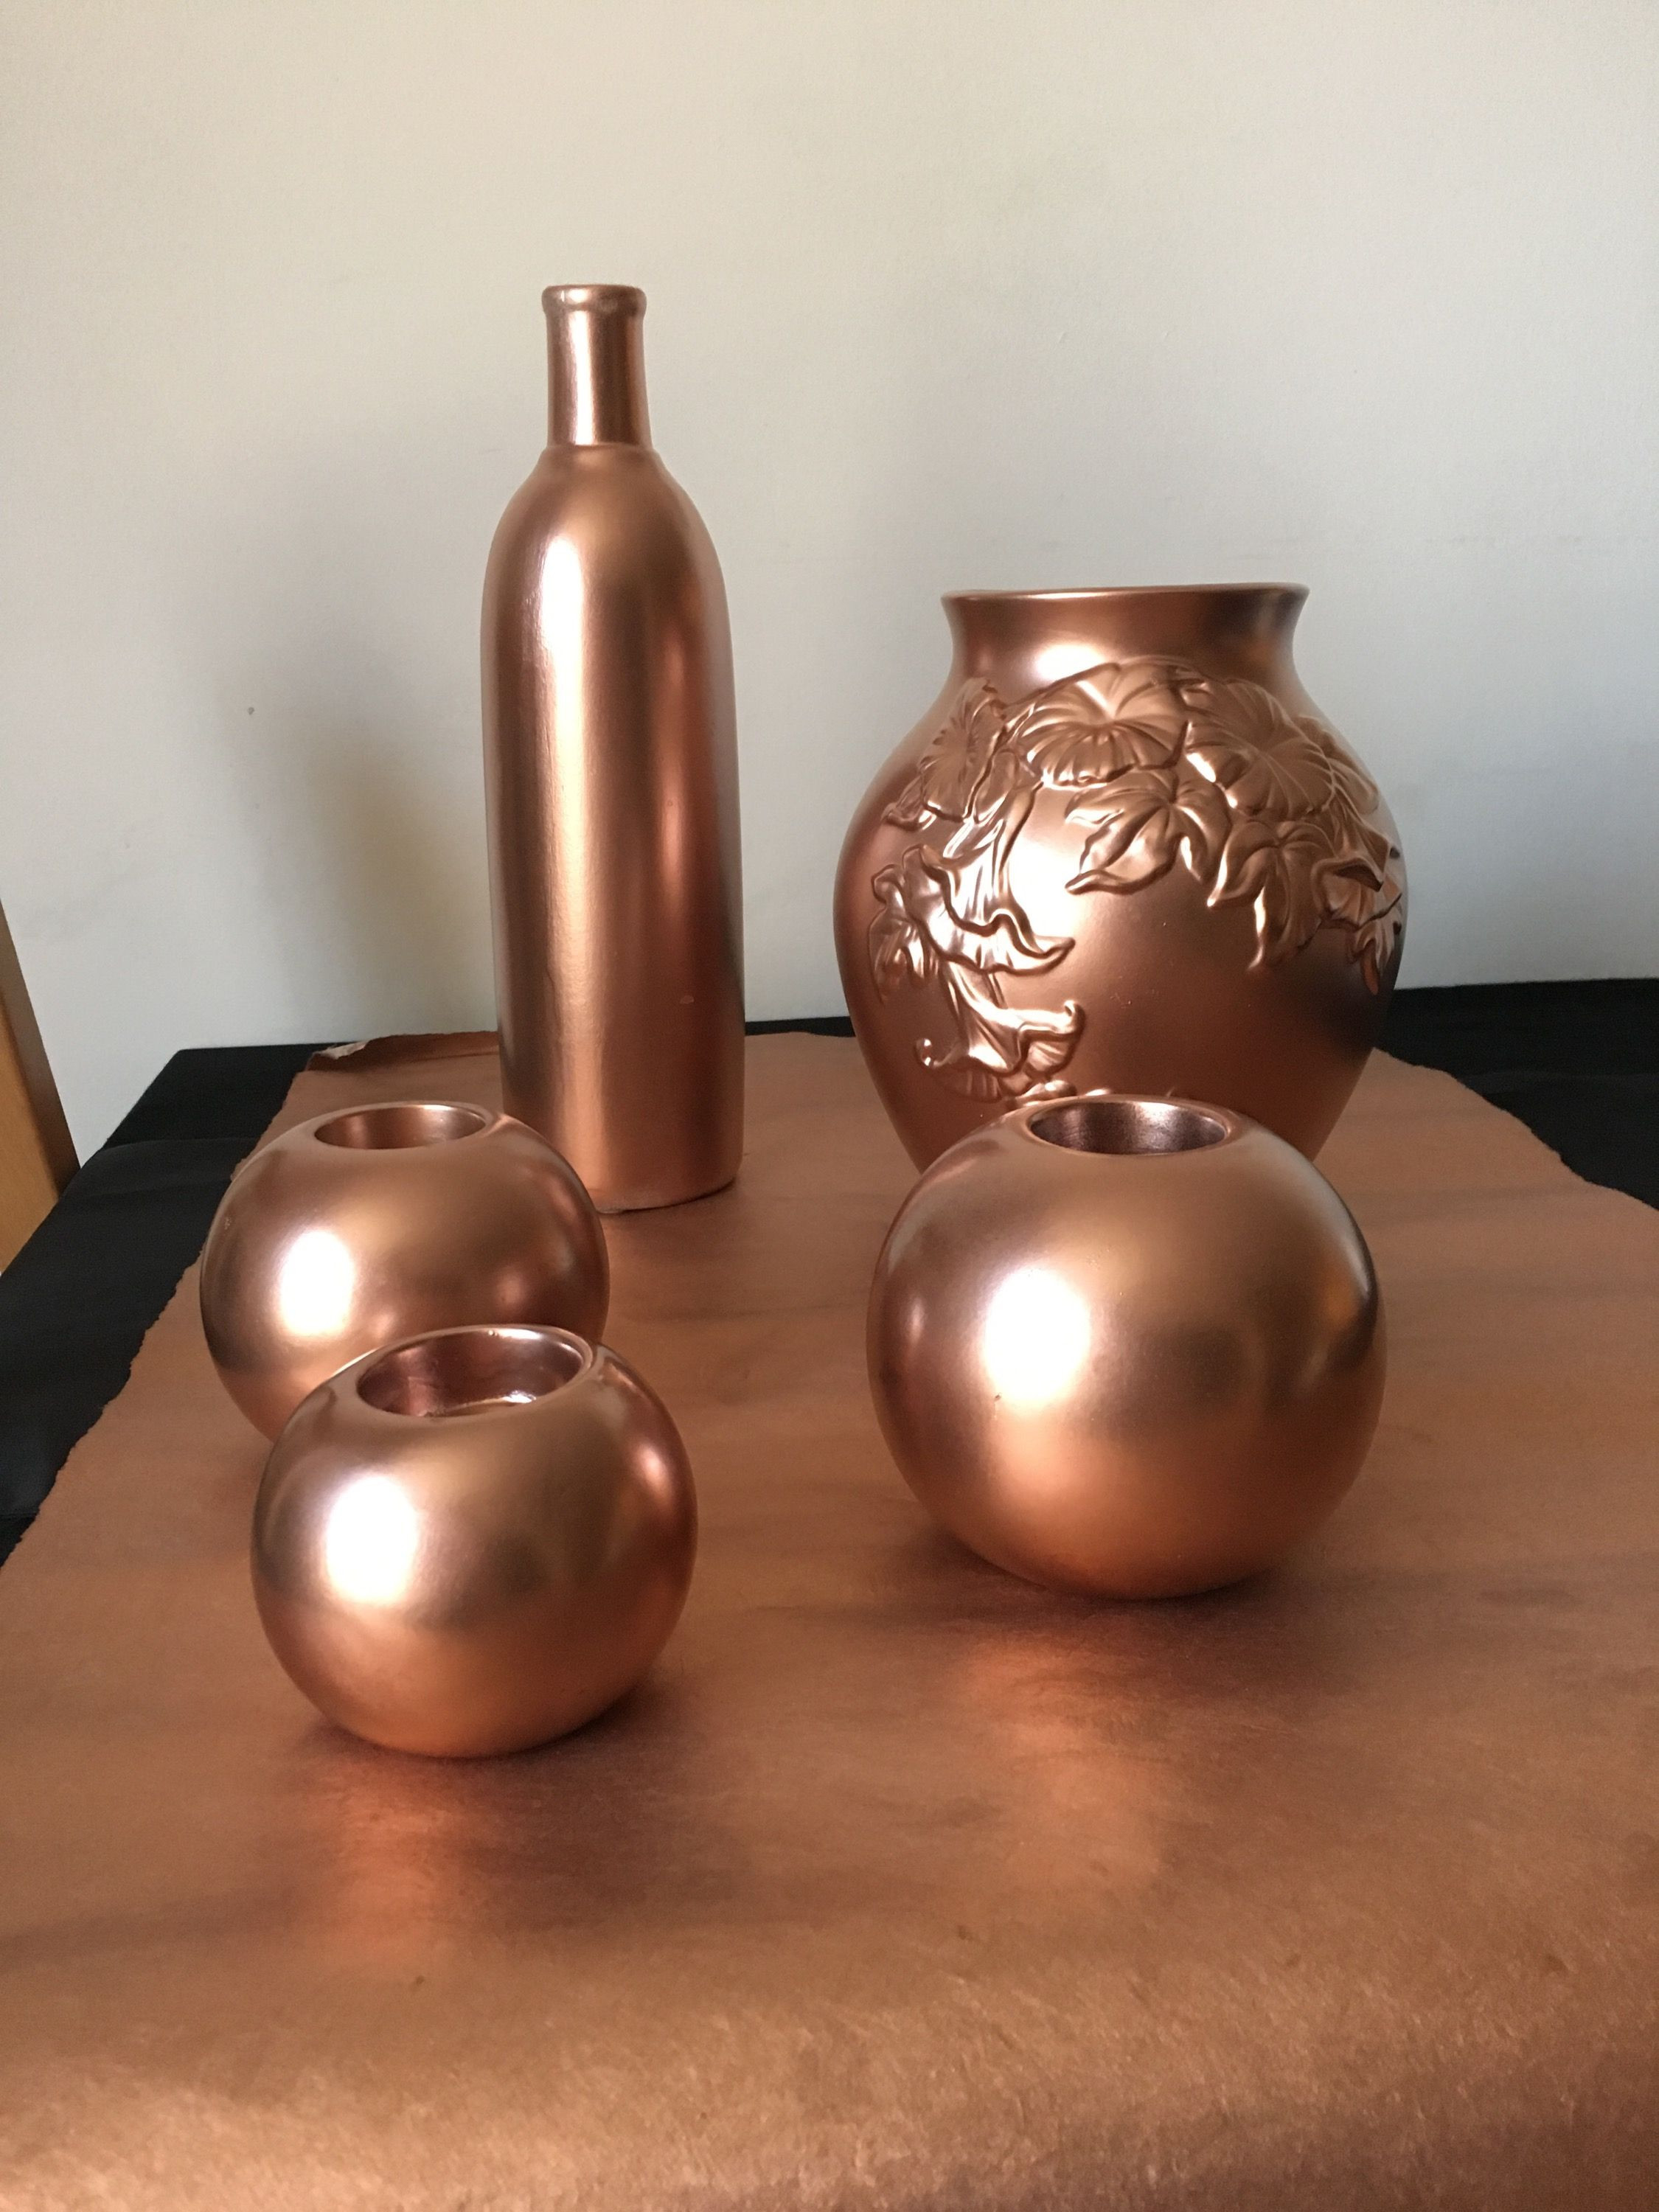 17 Ideal Chrome Floor Vase 2024 free download chrome floor vase of copper obsession bedroom pinterest chrome spray paint copper within josepharmstrong91 these 5 cost me just a3 from a charity shop mixed with the montana gold copper chro